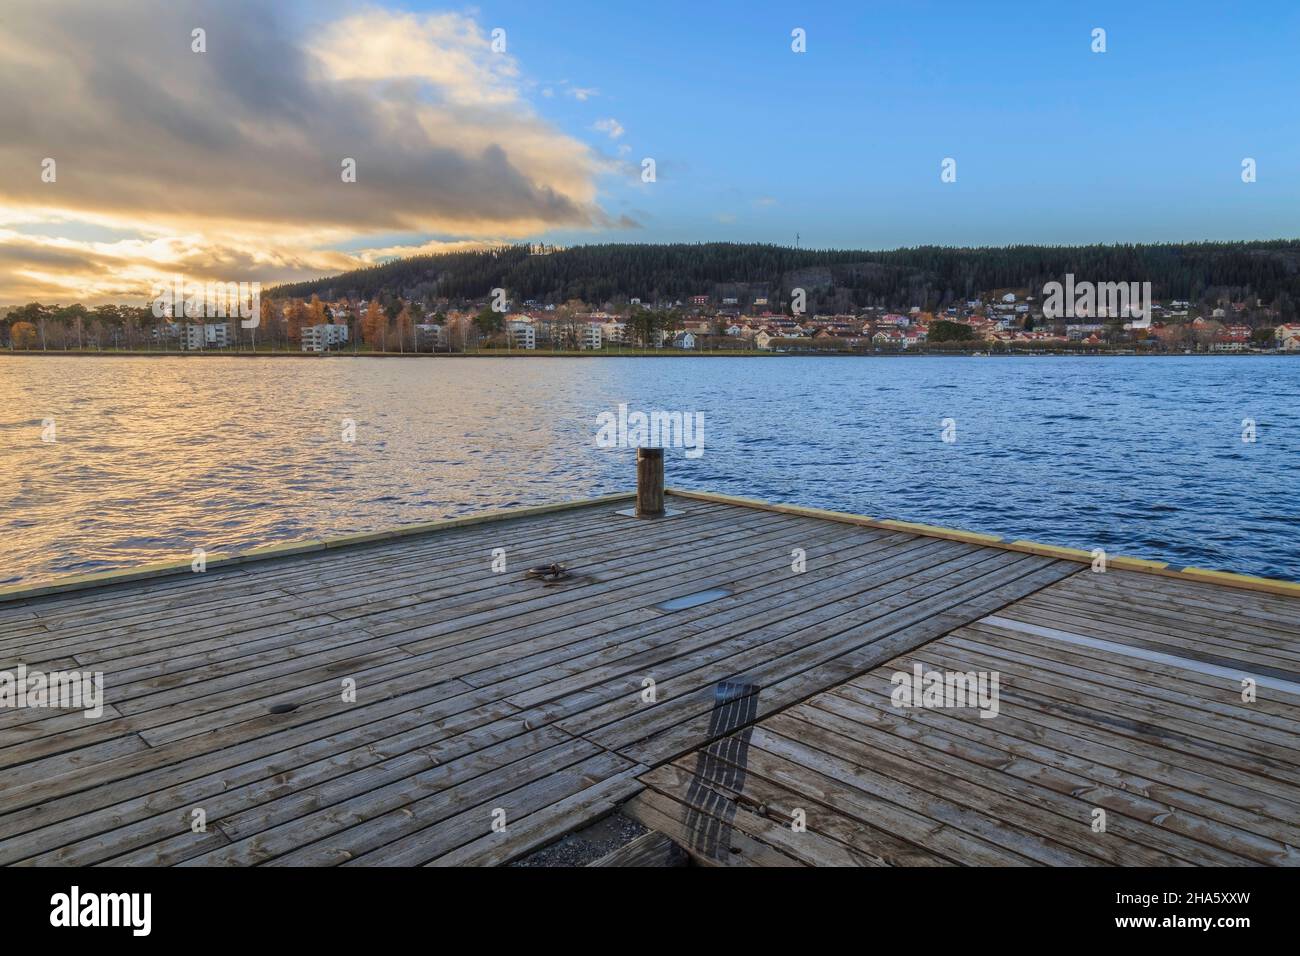 car track on a pier with city in back ground Stock Photo